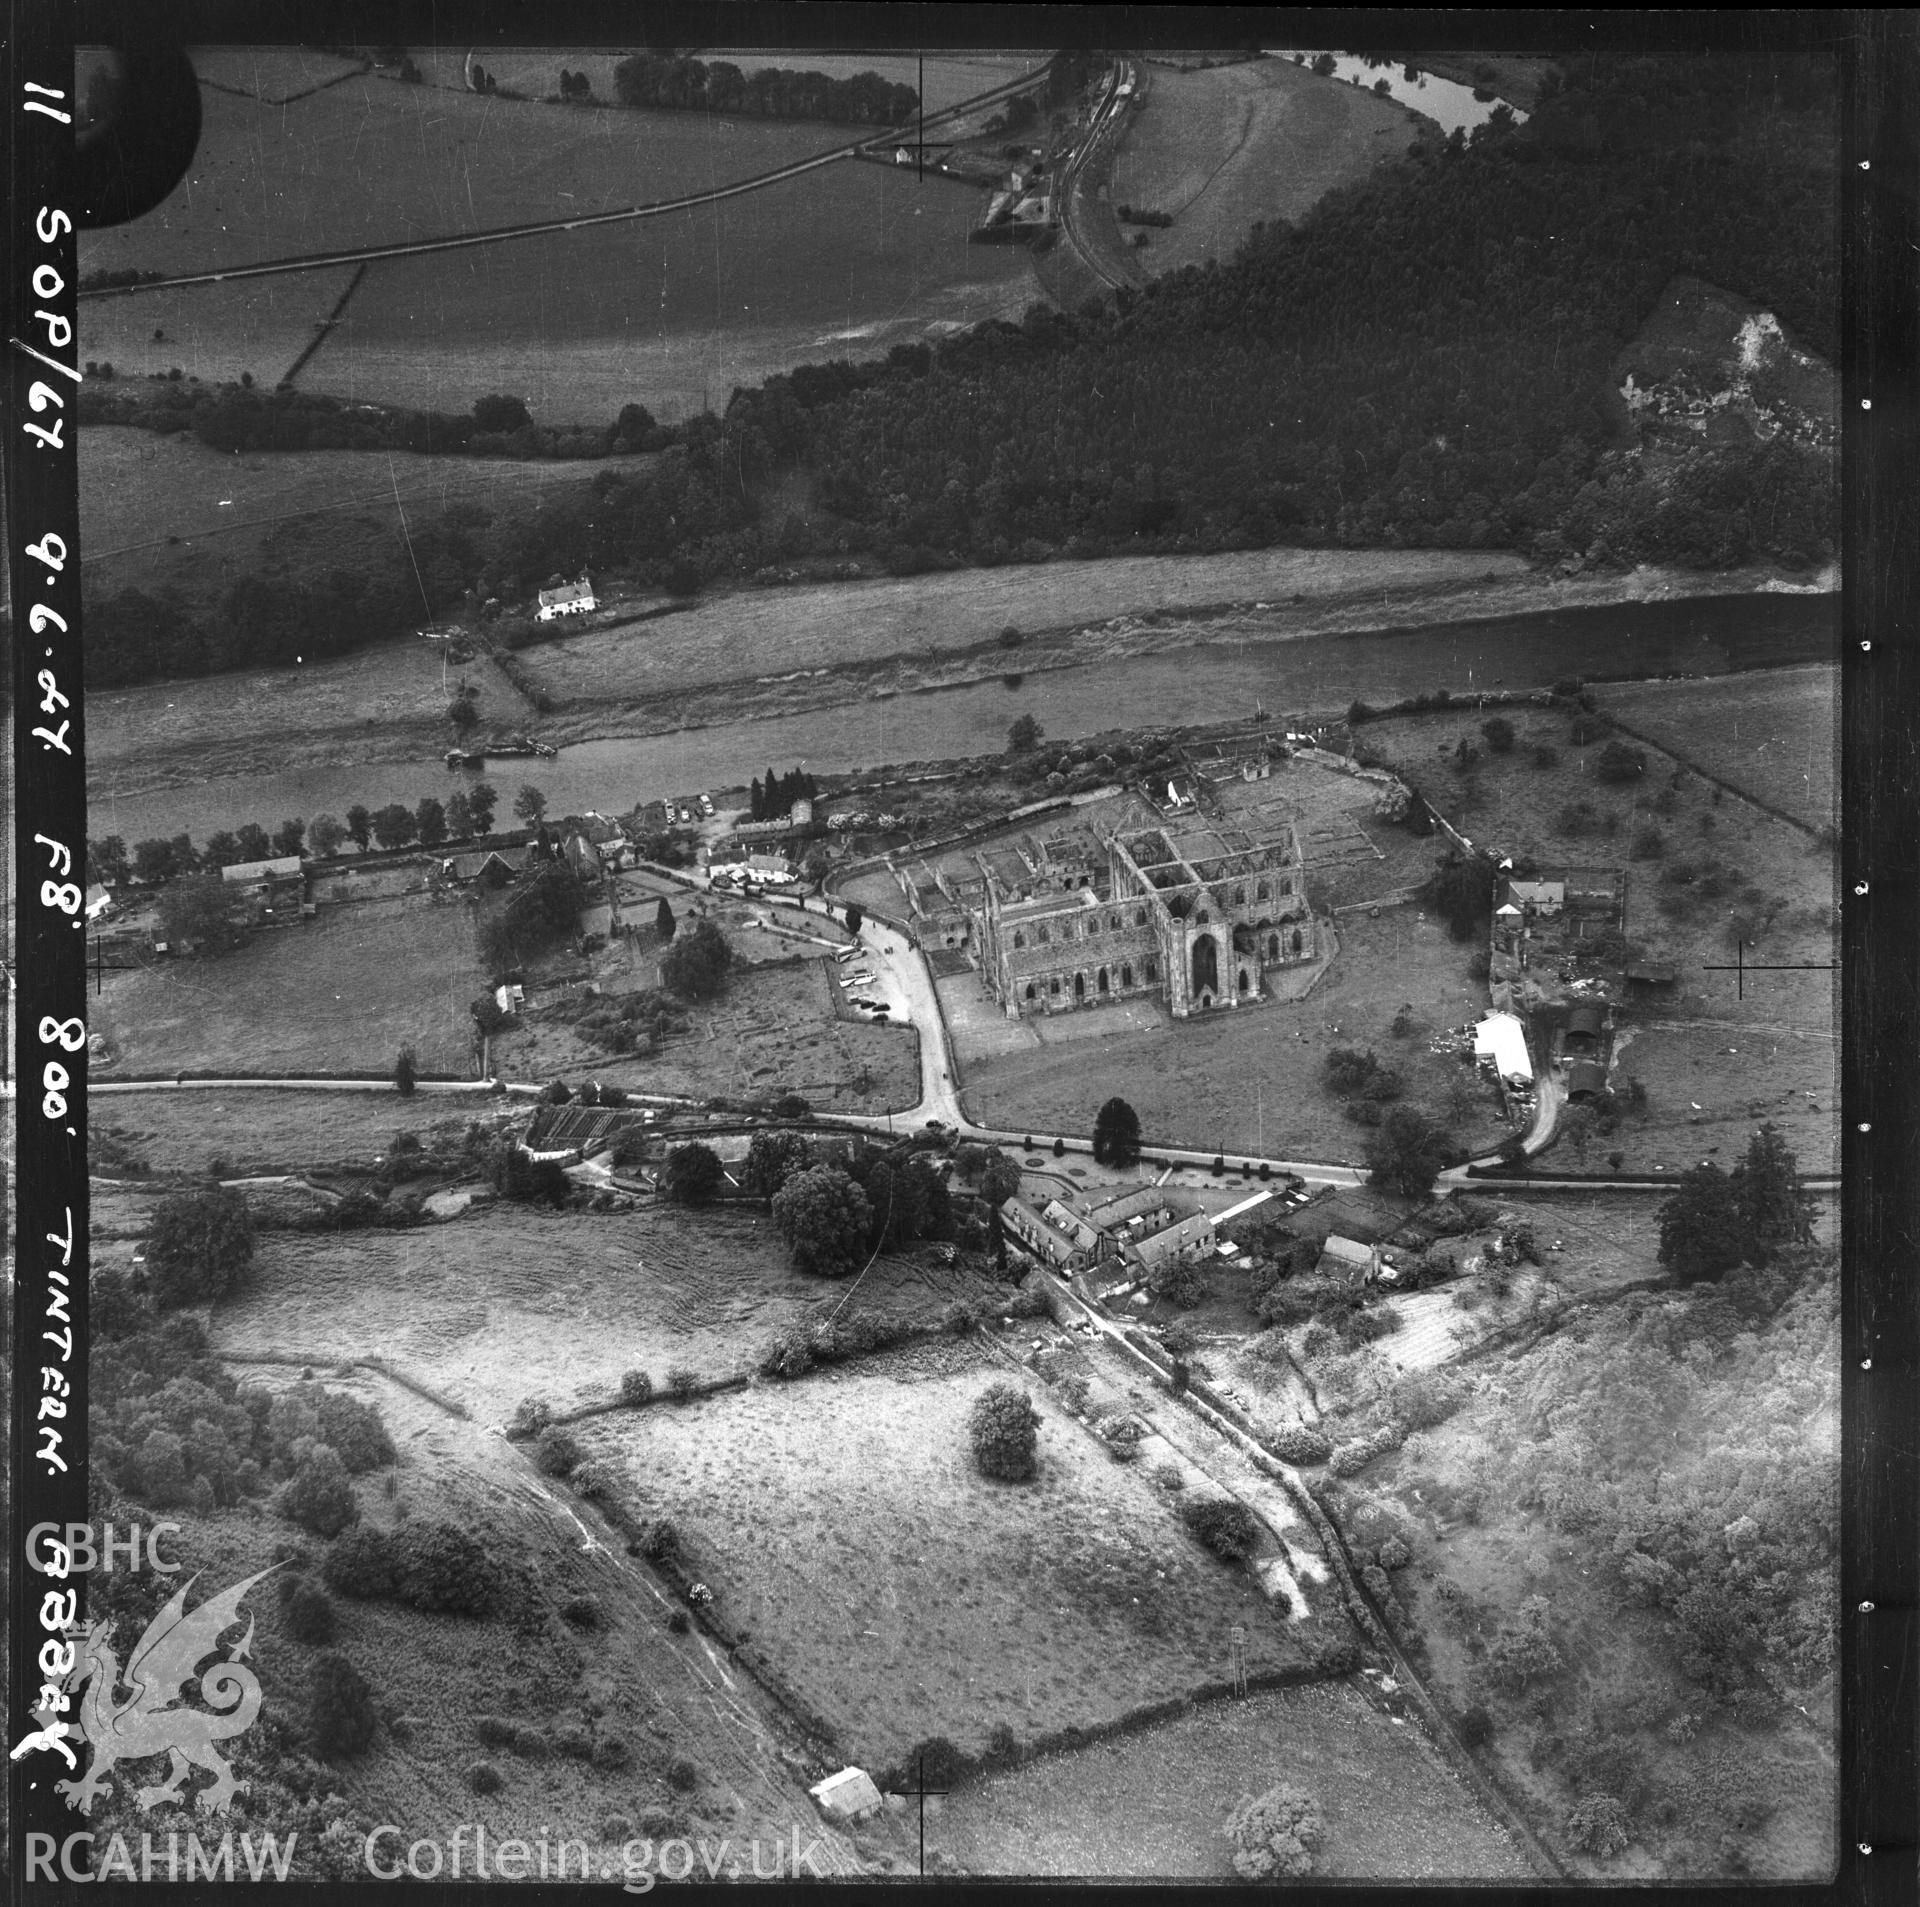 D.O.E. black and white view of Tintern Abbey: from the air (no print).